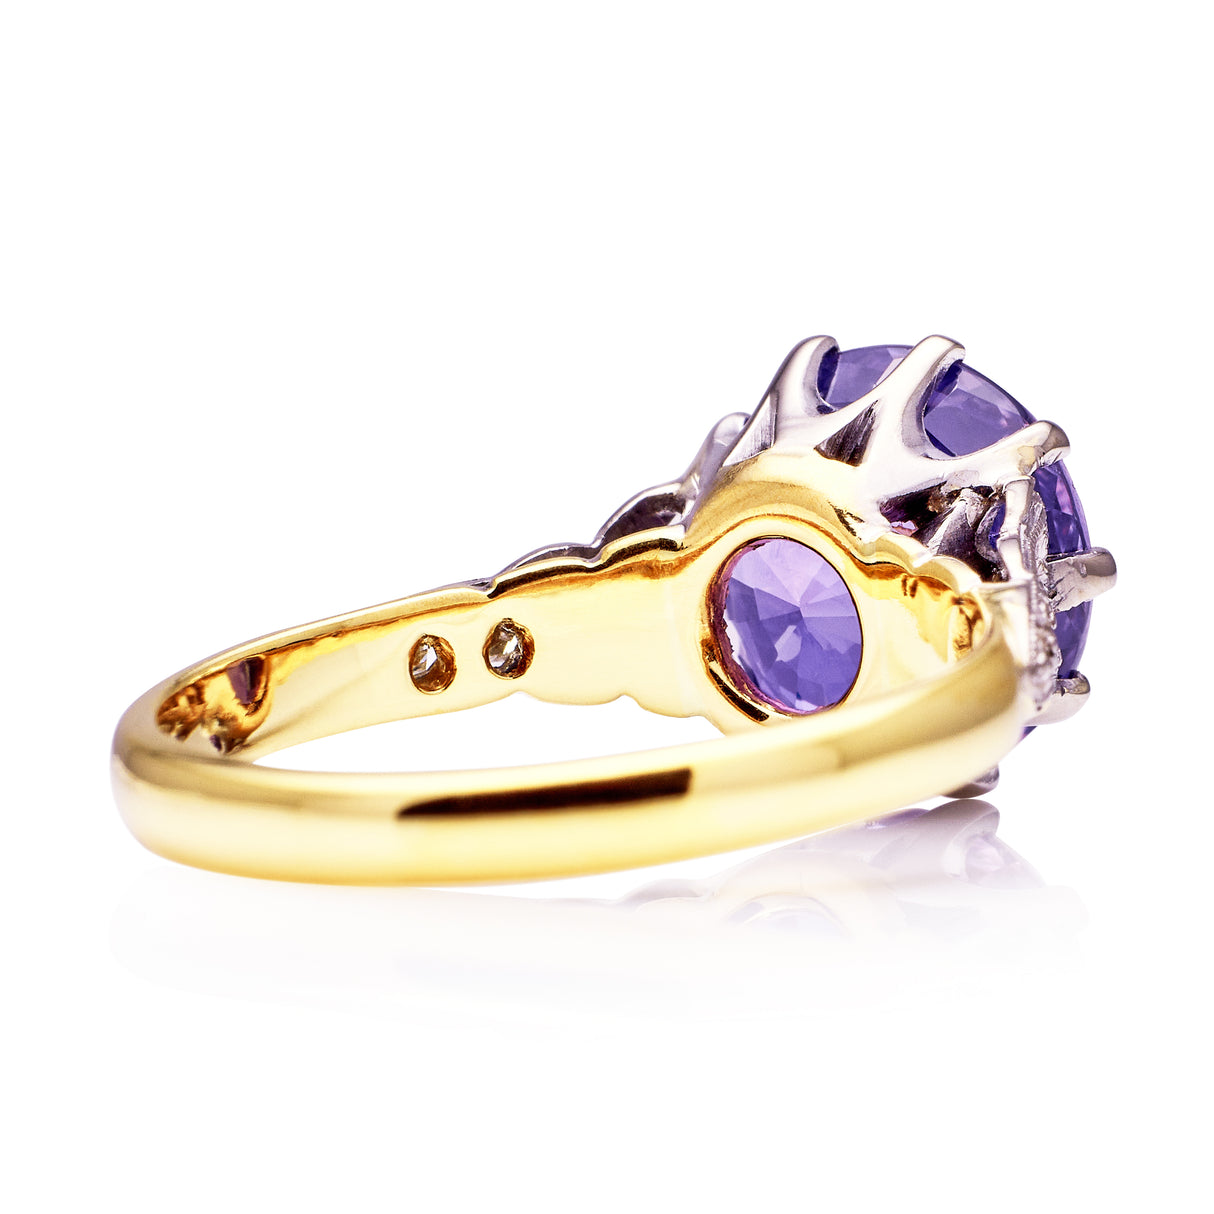 Hazy Lilac Sapphire and Diamond Ring, 18ct Yellow Gold and Platinum